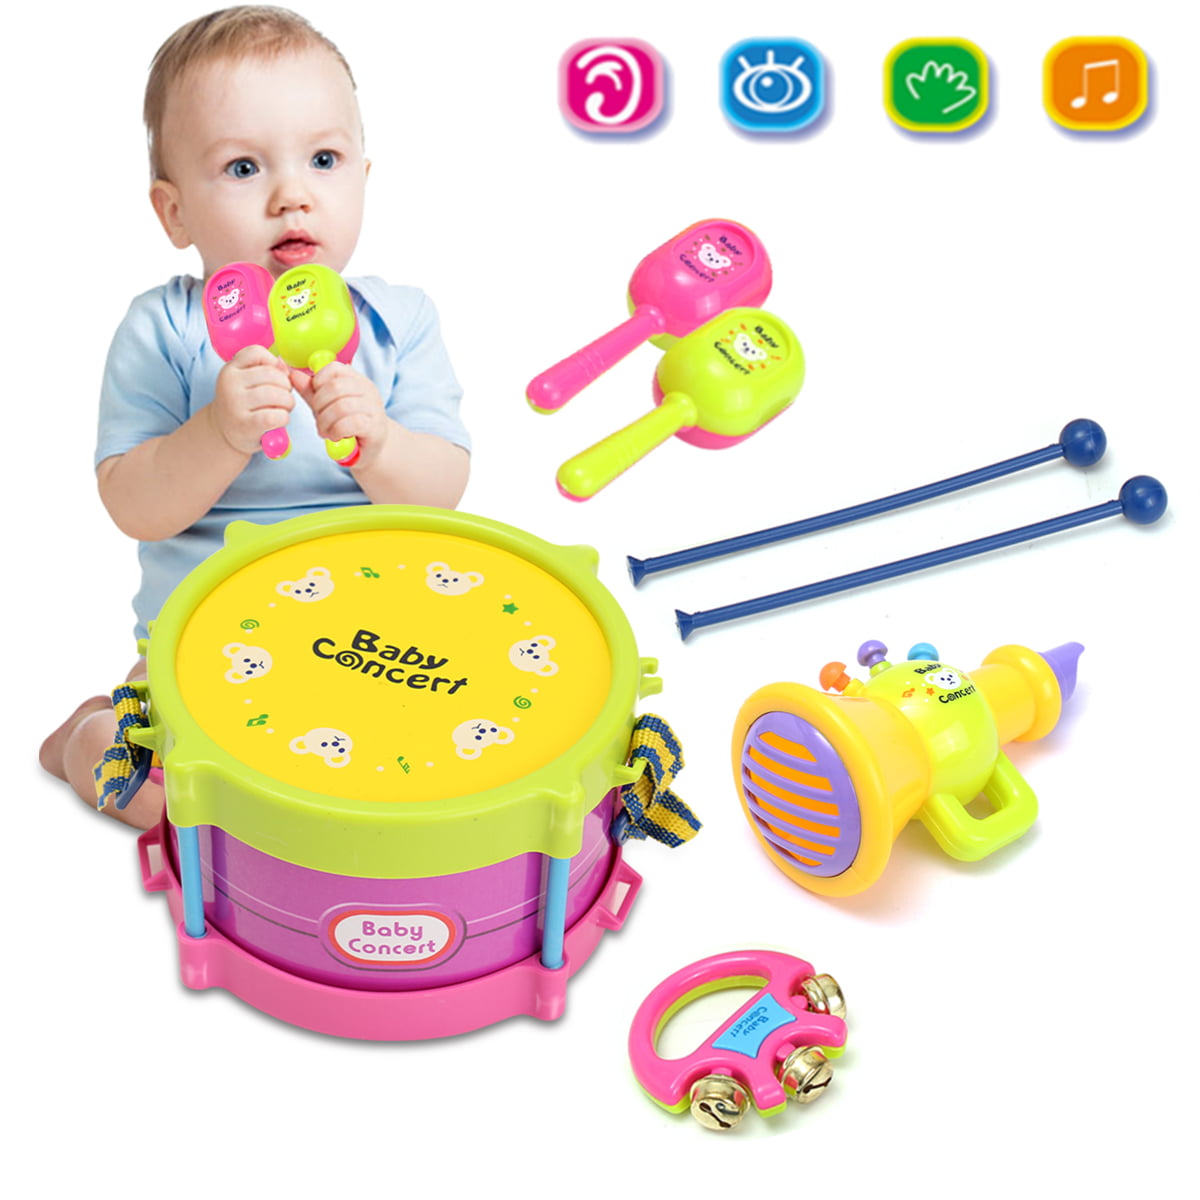 Sipring Musical Toys for Kids Baby Roll Drum Musical Instruments Band Kit Children Toy-5pcs-Random Color Handbells 